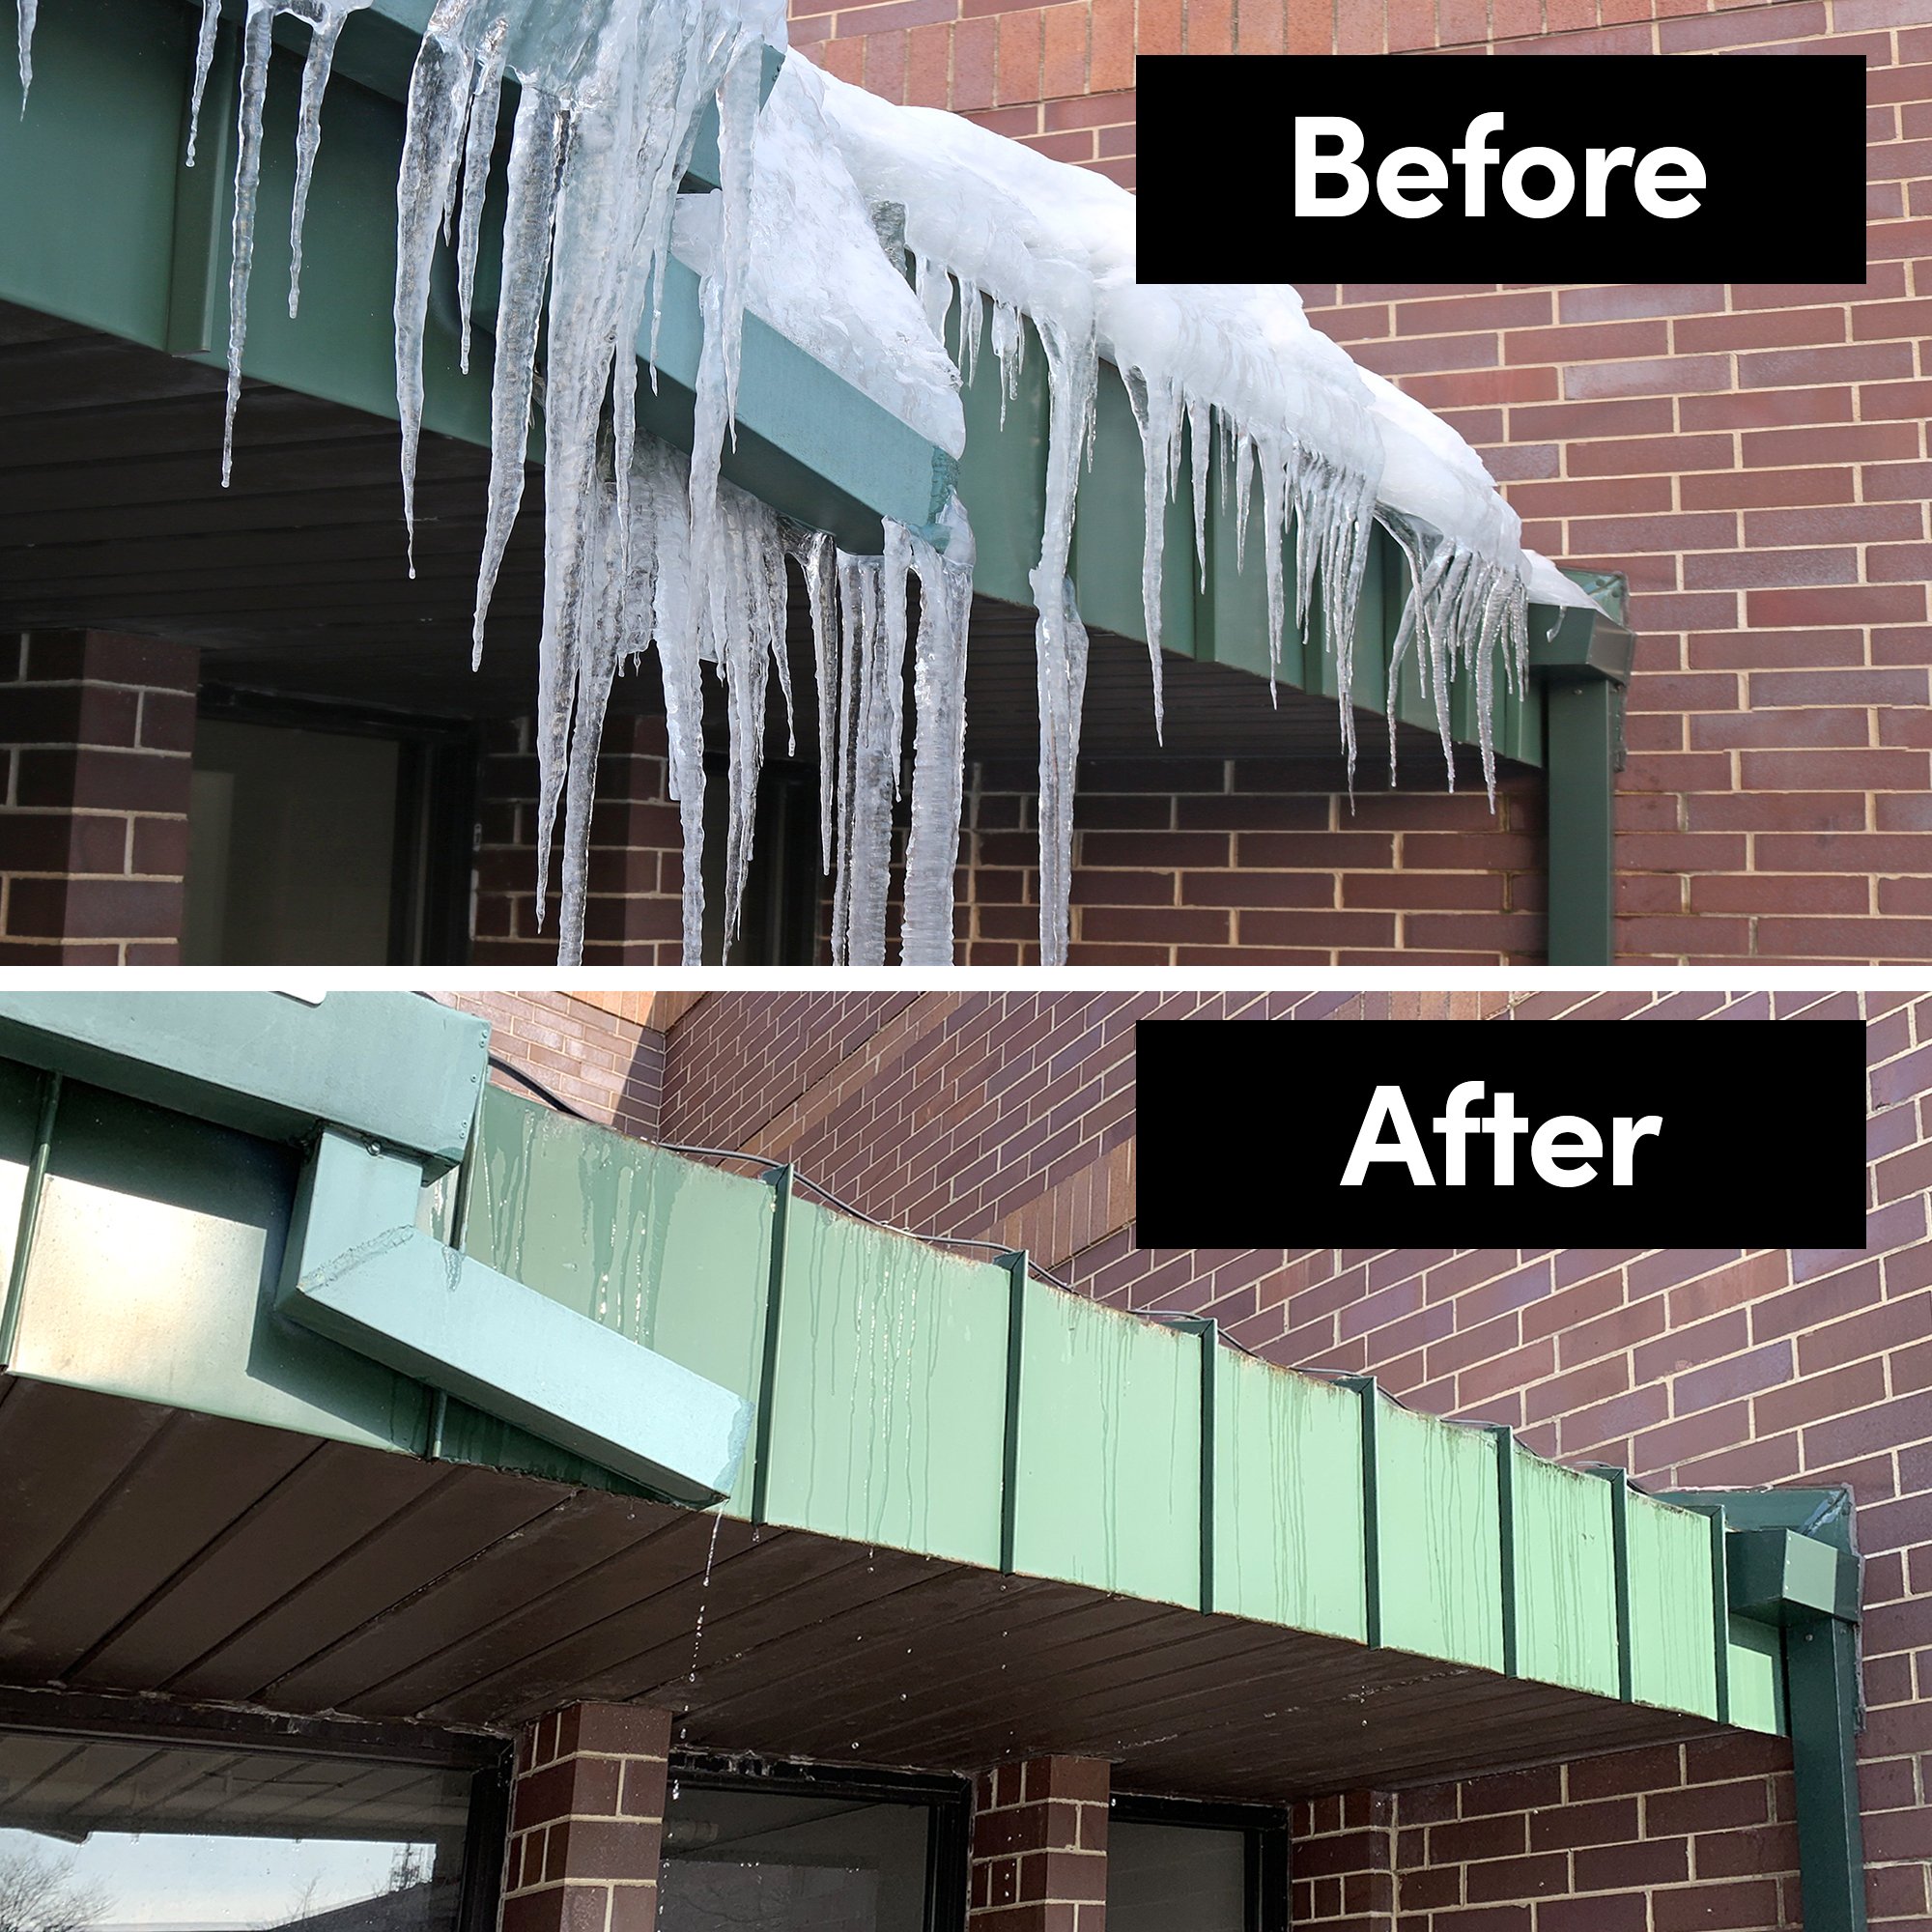 https://ik.warmlyyours.com/img/gutter-deicing-before-and-after4-gov2rc.jpeg